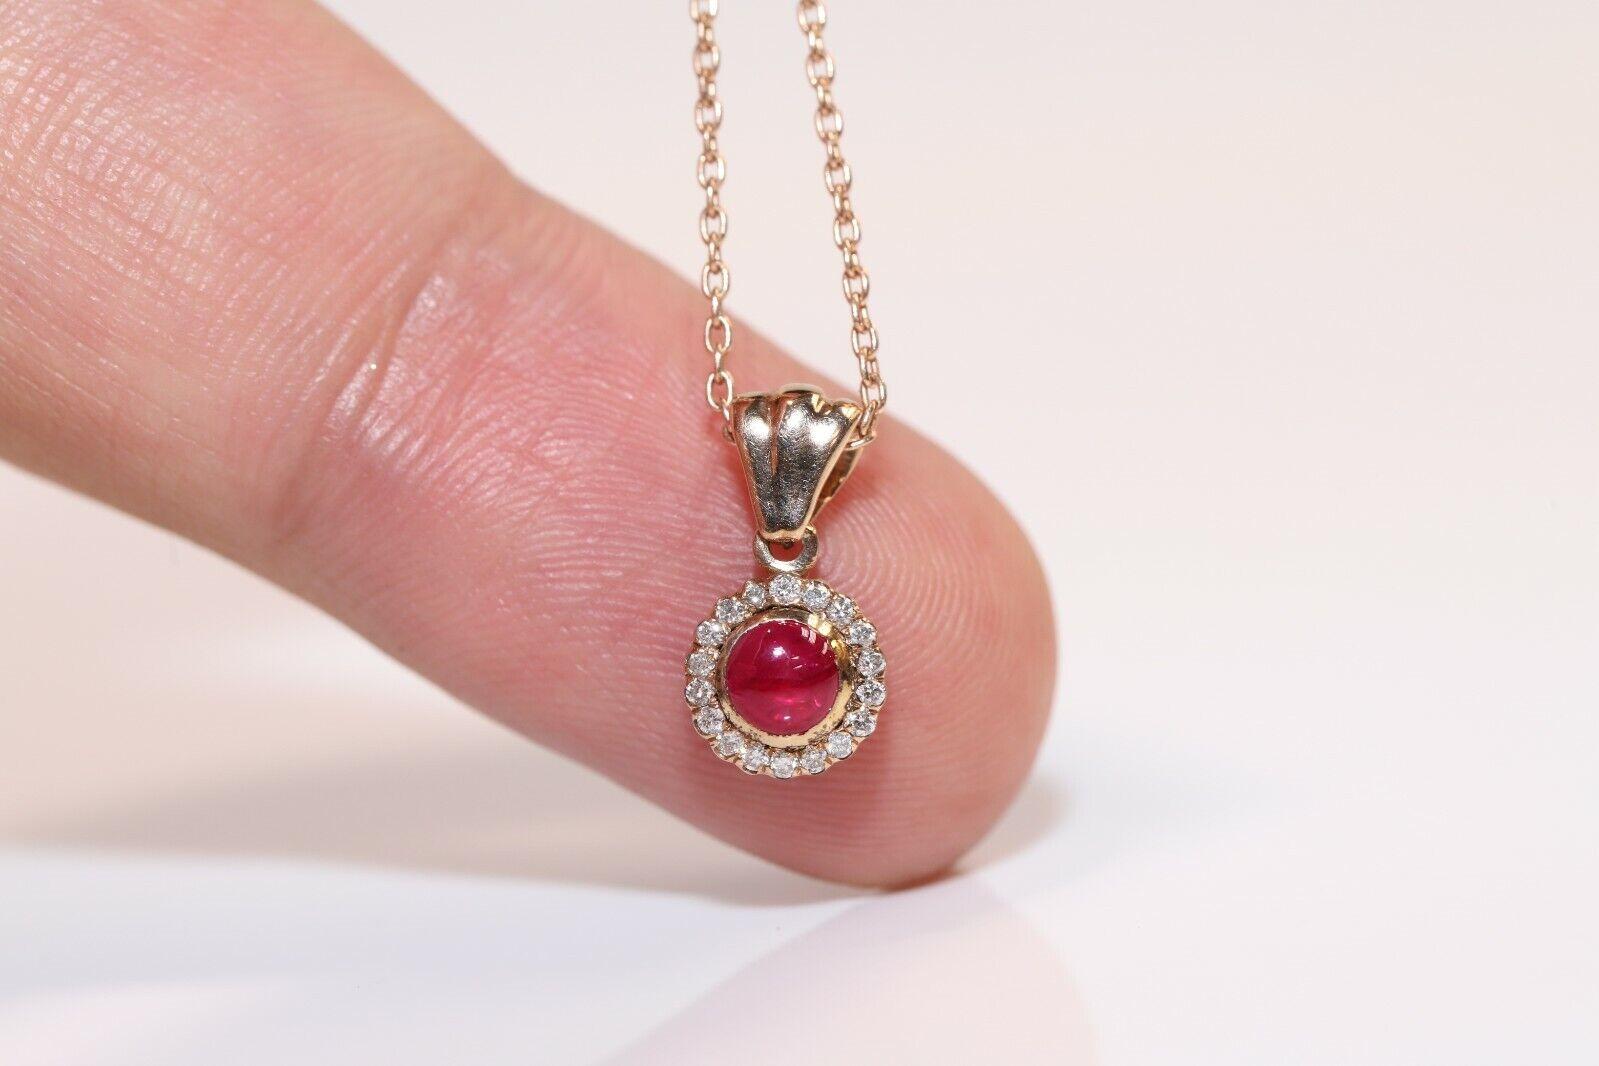 Retro Vintage Circa 1990s 8k Gold Natural Diamond And Cabochon Ruby Pendant Necklace For Sale